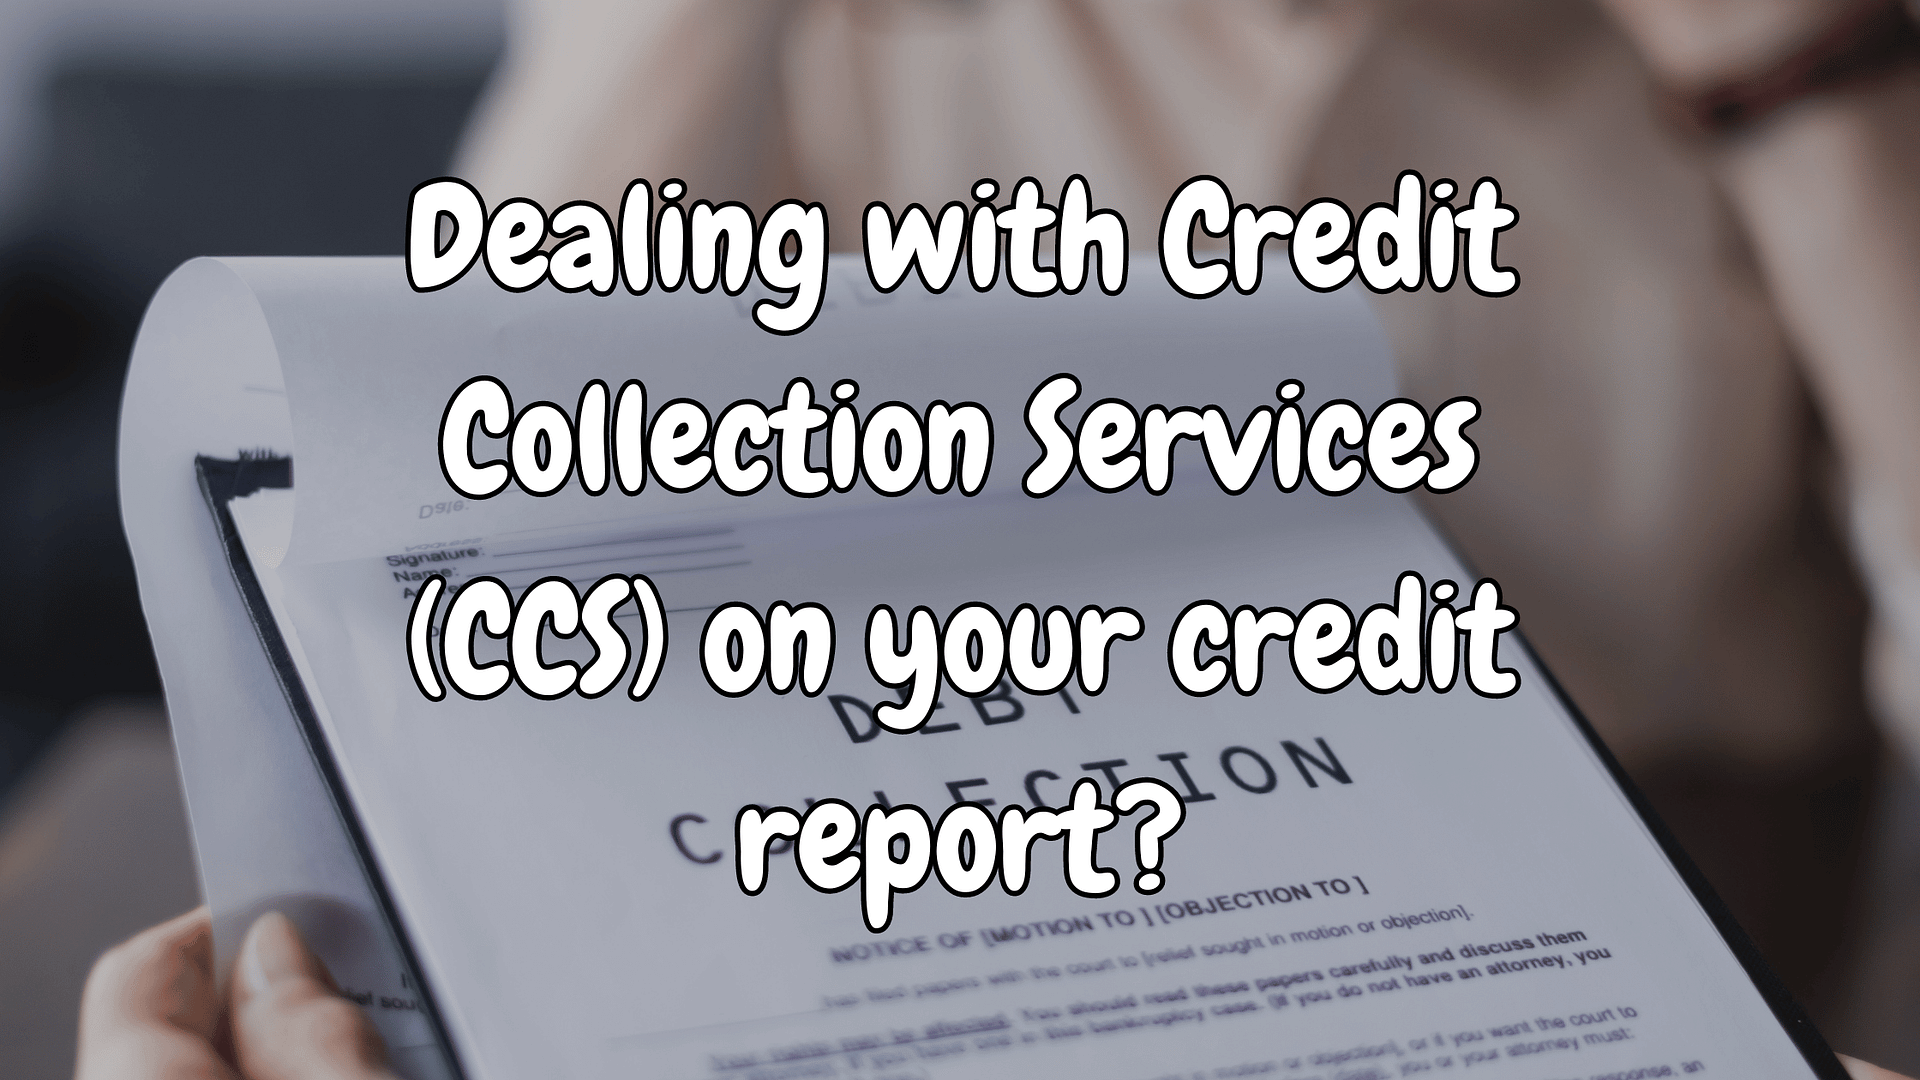 Dealing with Credit Collection Services (CCS) on your credit report